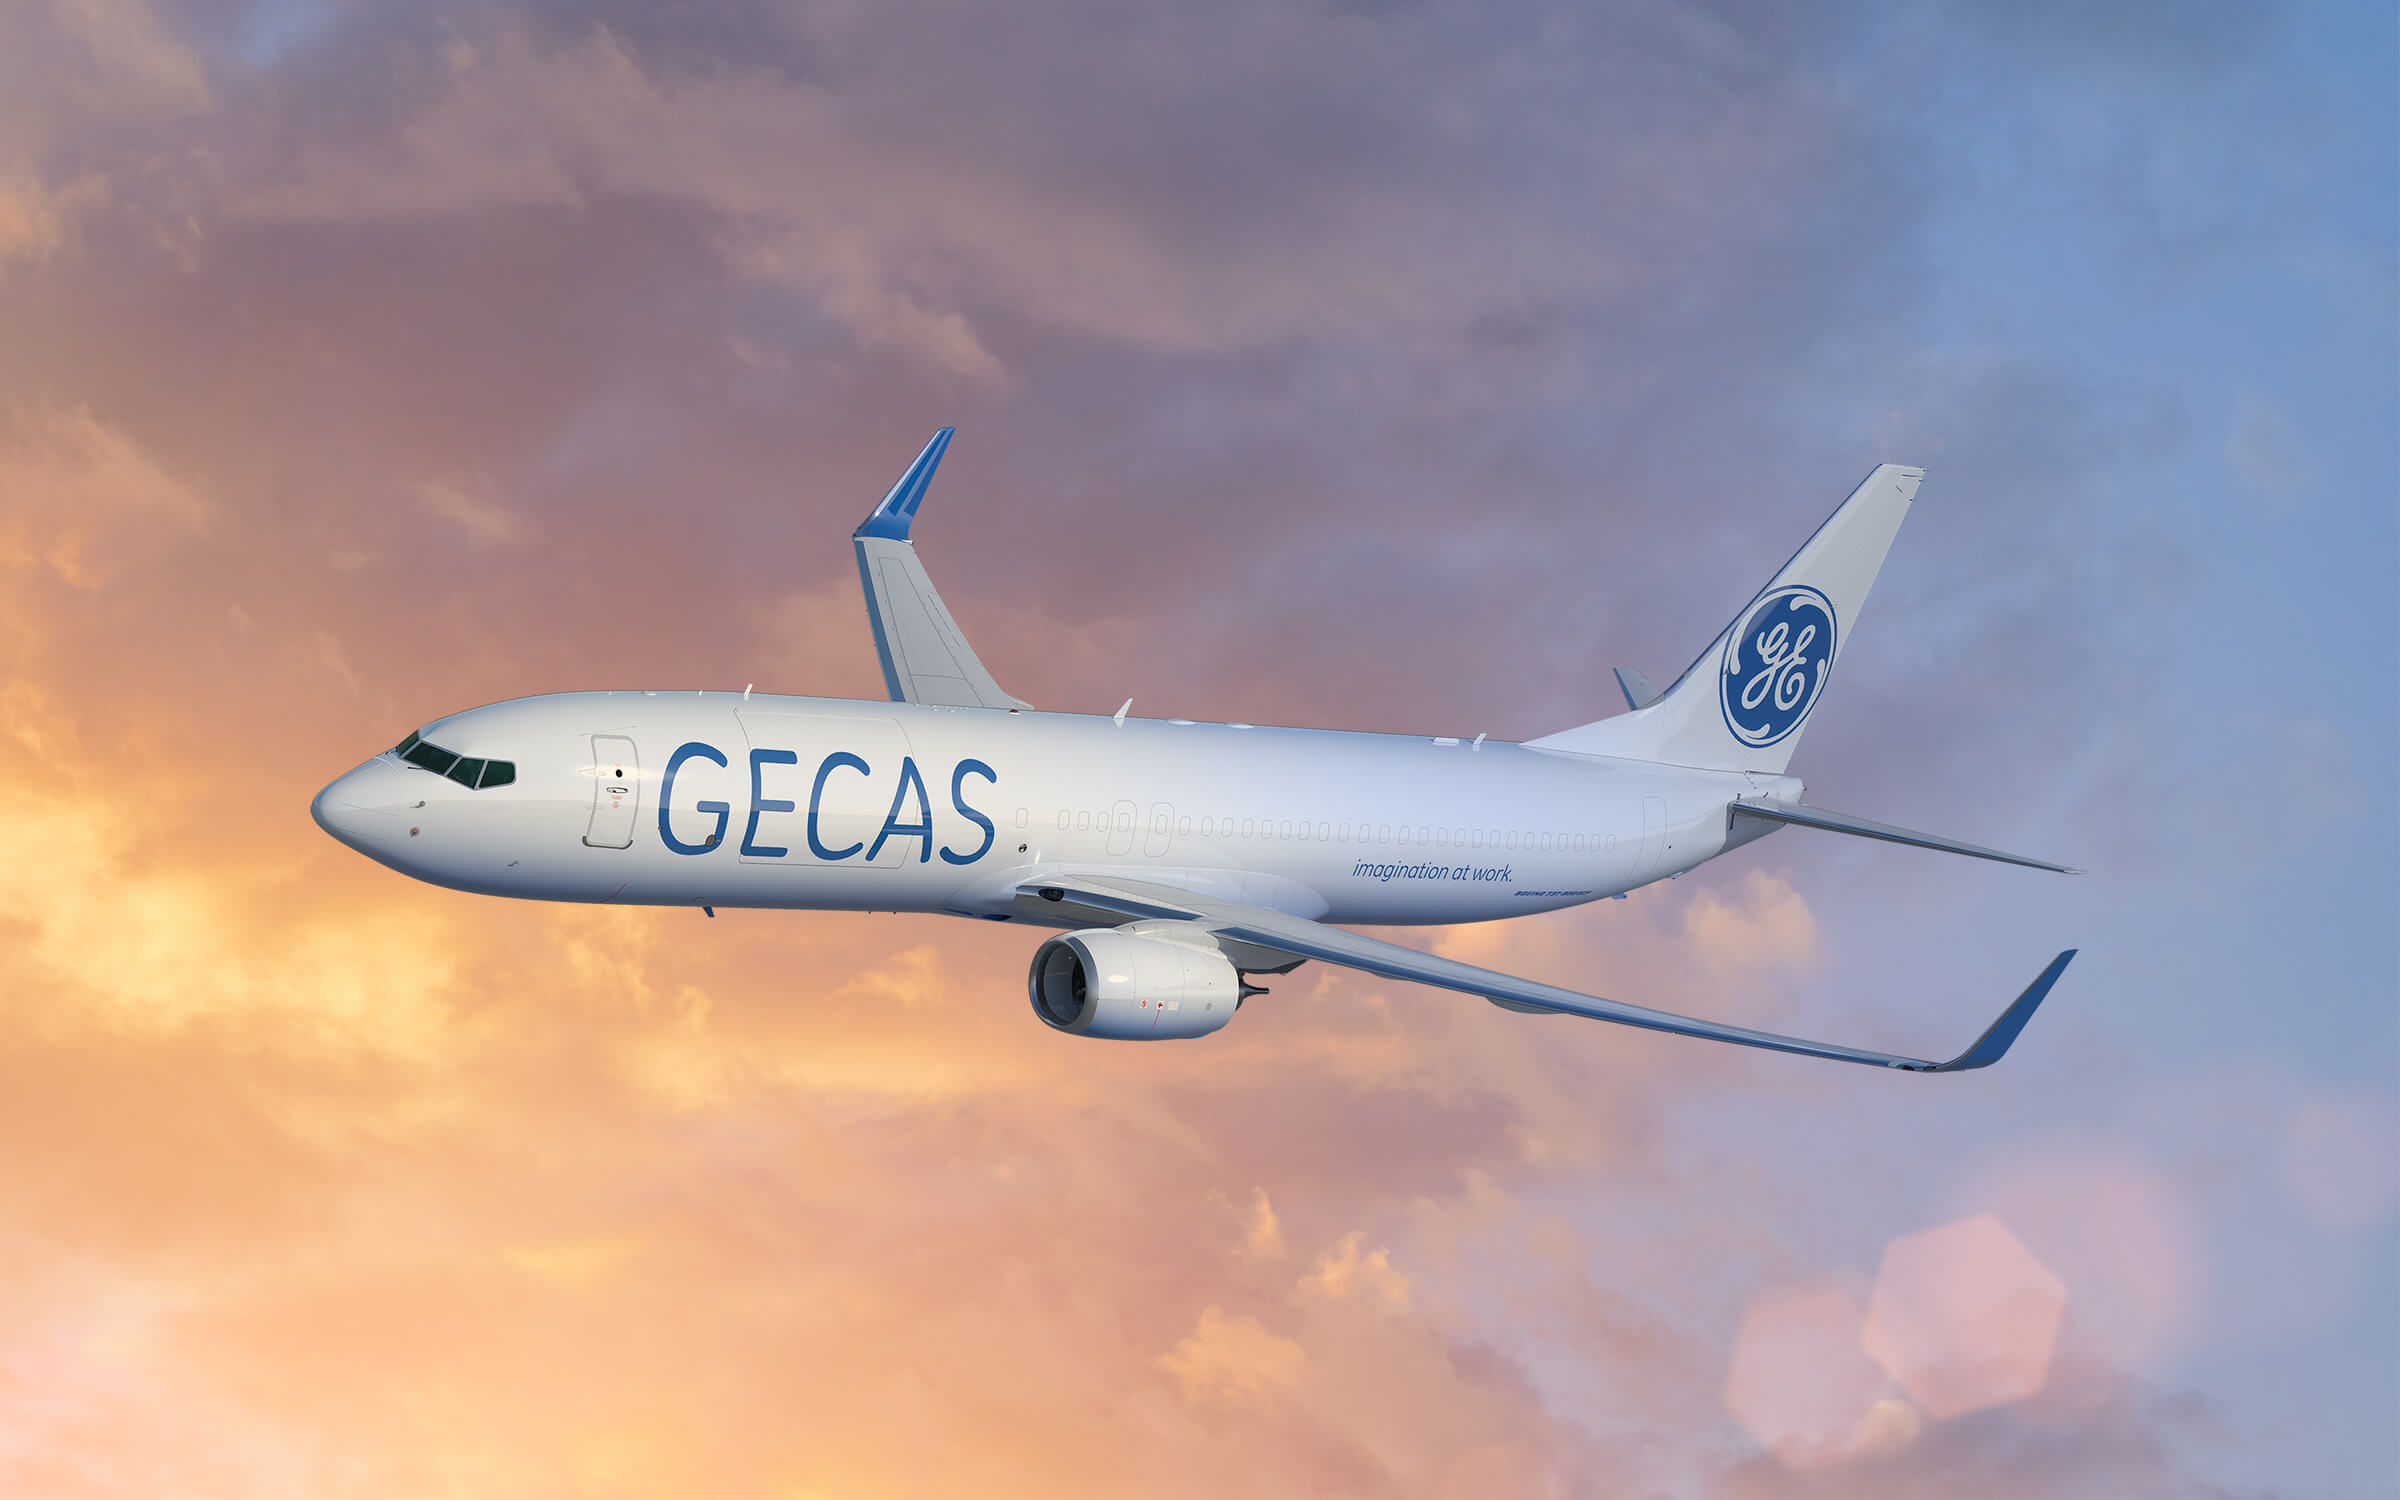 GECAS plans to convert a further 30 737-800s to Freighters